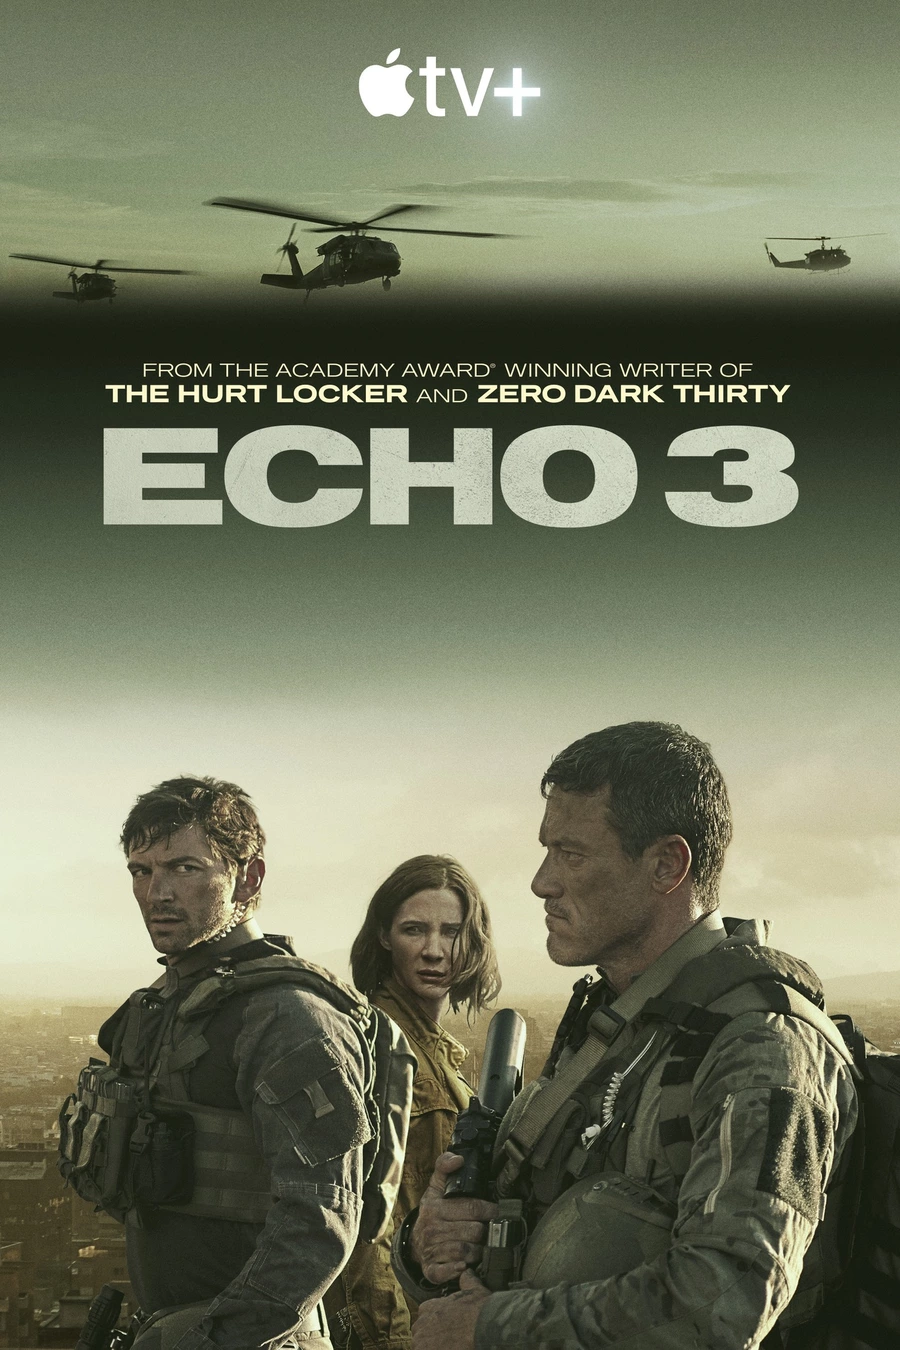 Yesterday on "Apple TV+" released a multi-episode action movie «Echo 3», starring Michiel Huisman and Luke Evans.. The action thriller is set in South America. When Amber Chesborough - a brilliant young scientist who is the heart of a small American family - disappears on the border between Colombia and Venezuela, her brother Bambi and husband Prince, both of whom have extensive military experience and a troubled past, rush to find her.
The project is written and directed by Marc Boal, screenwriter and producer of «The Hurt Locker», «Zero Dark Thirty», «Detroit» and «Triple Frontier».